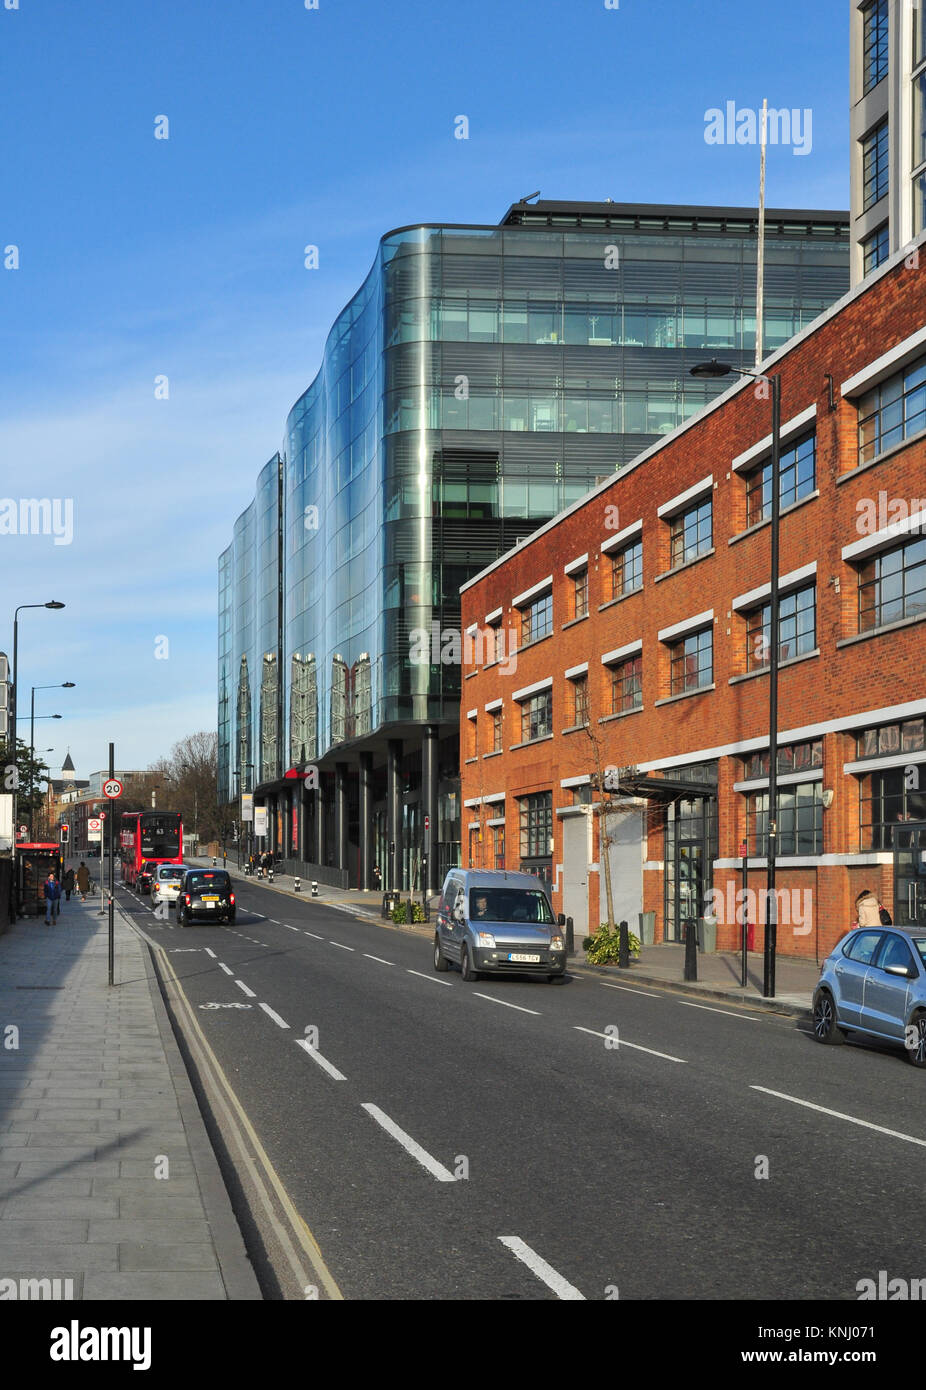 New and older buildings, York Way, by King's Cross, London, England, UK Stock Photo